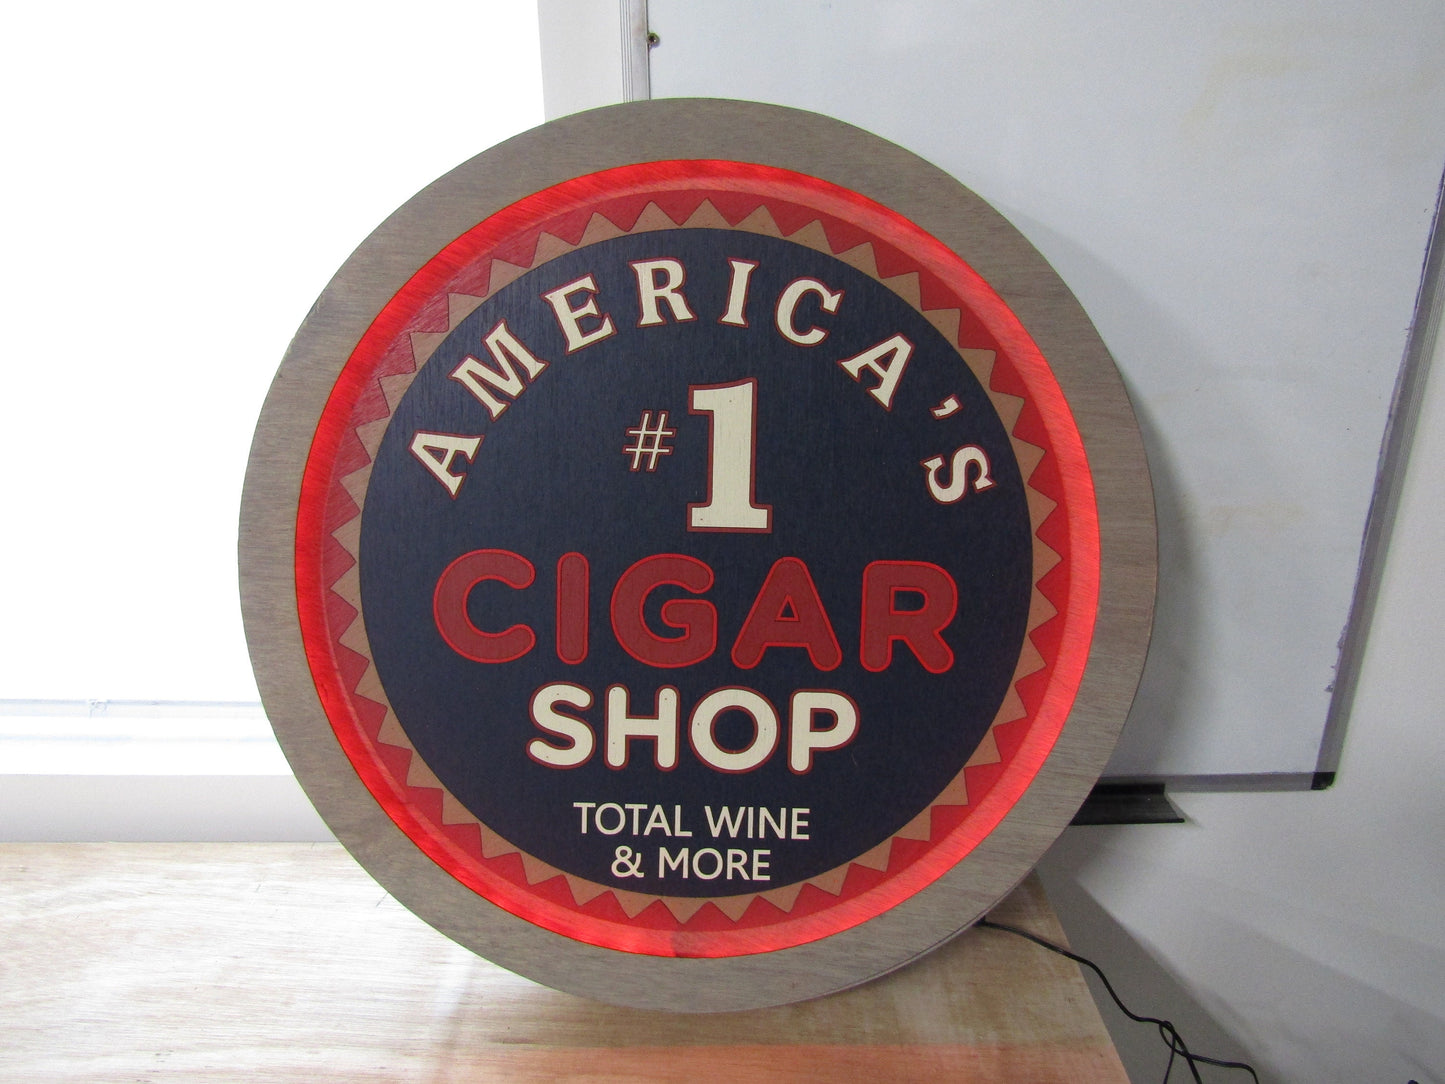 Custom Wood Cigar Shop #1 America Red White And Blue Wine LED Light Sign Commerical Signage Bar Store Convenient Shop Basement Handmade